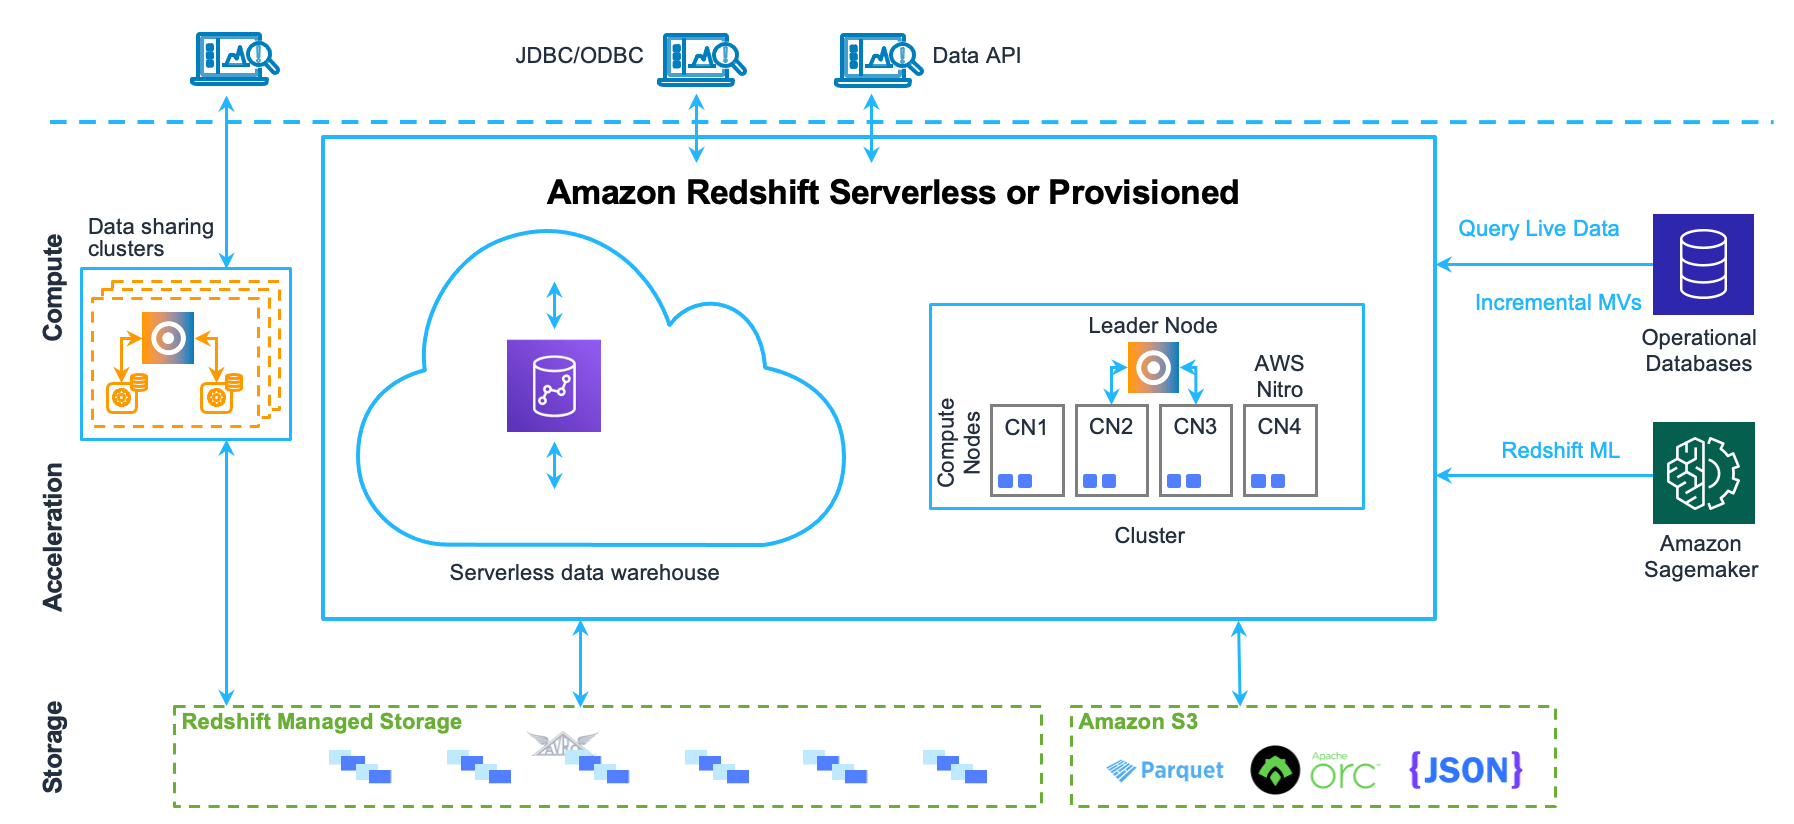 A digram of Amazon Redshift architecture